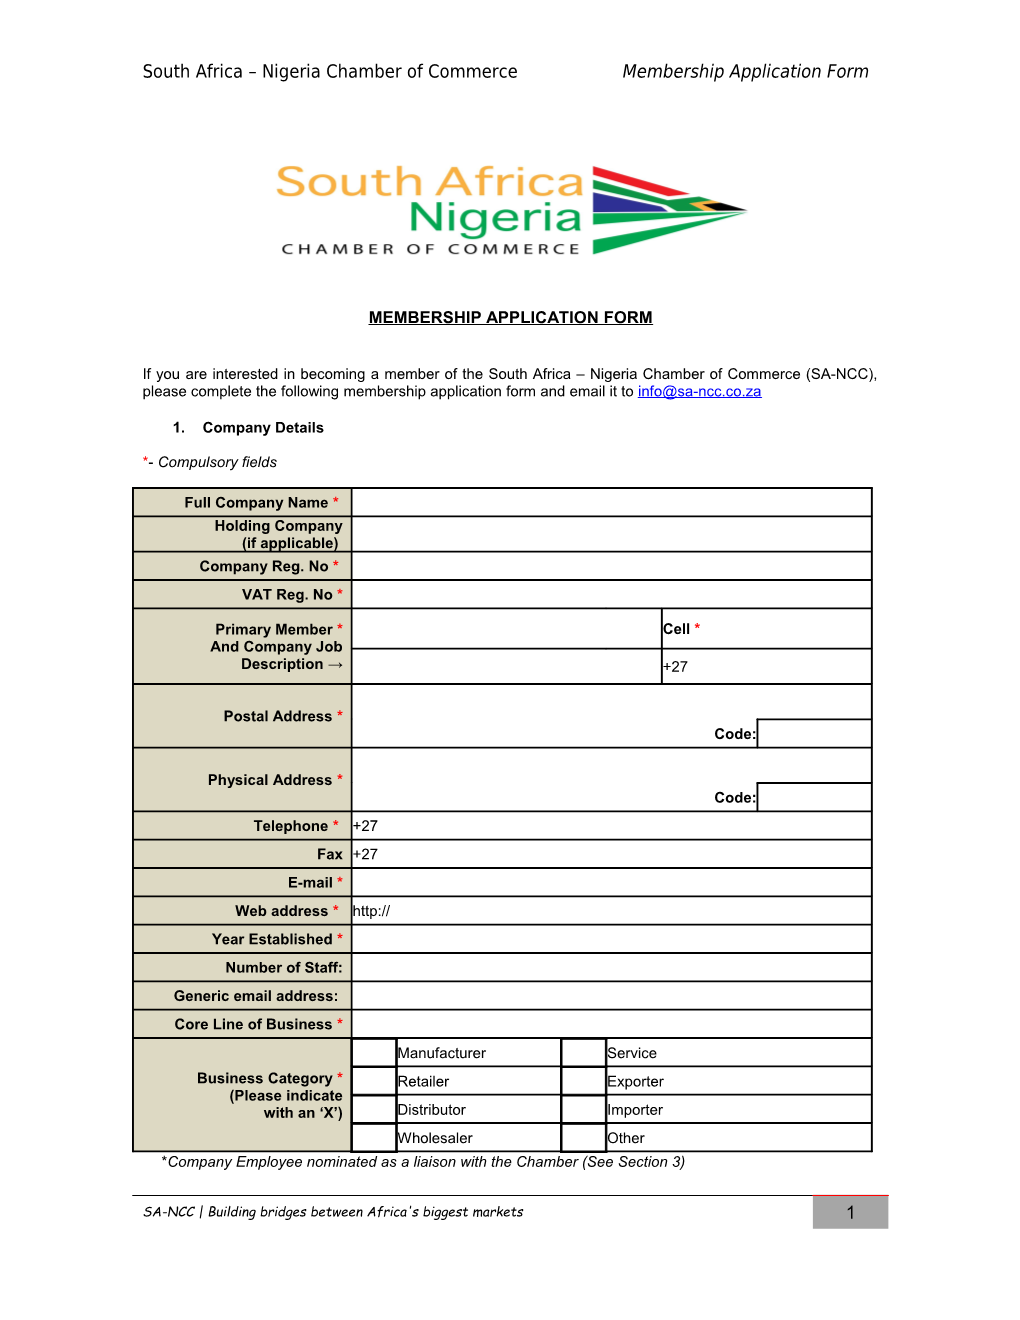 South Africa Nigeria Chamber of Commerce Membership Application Form